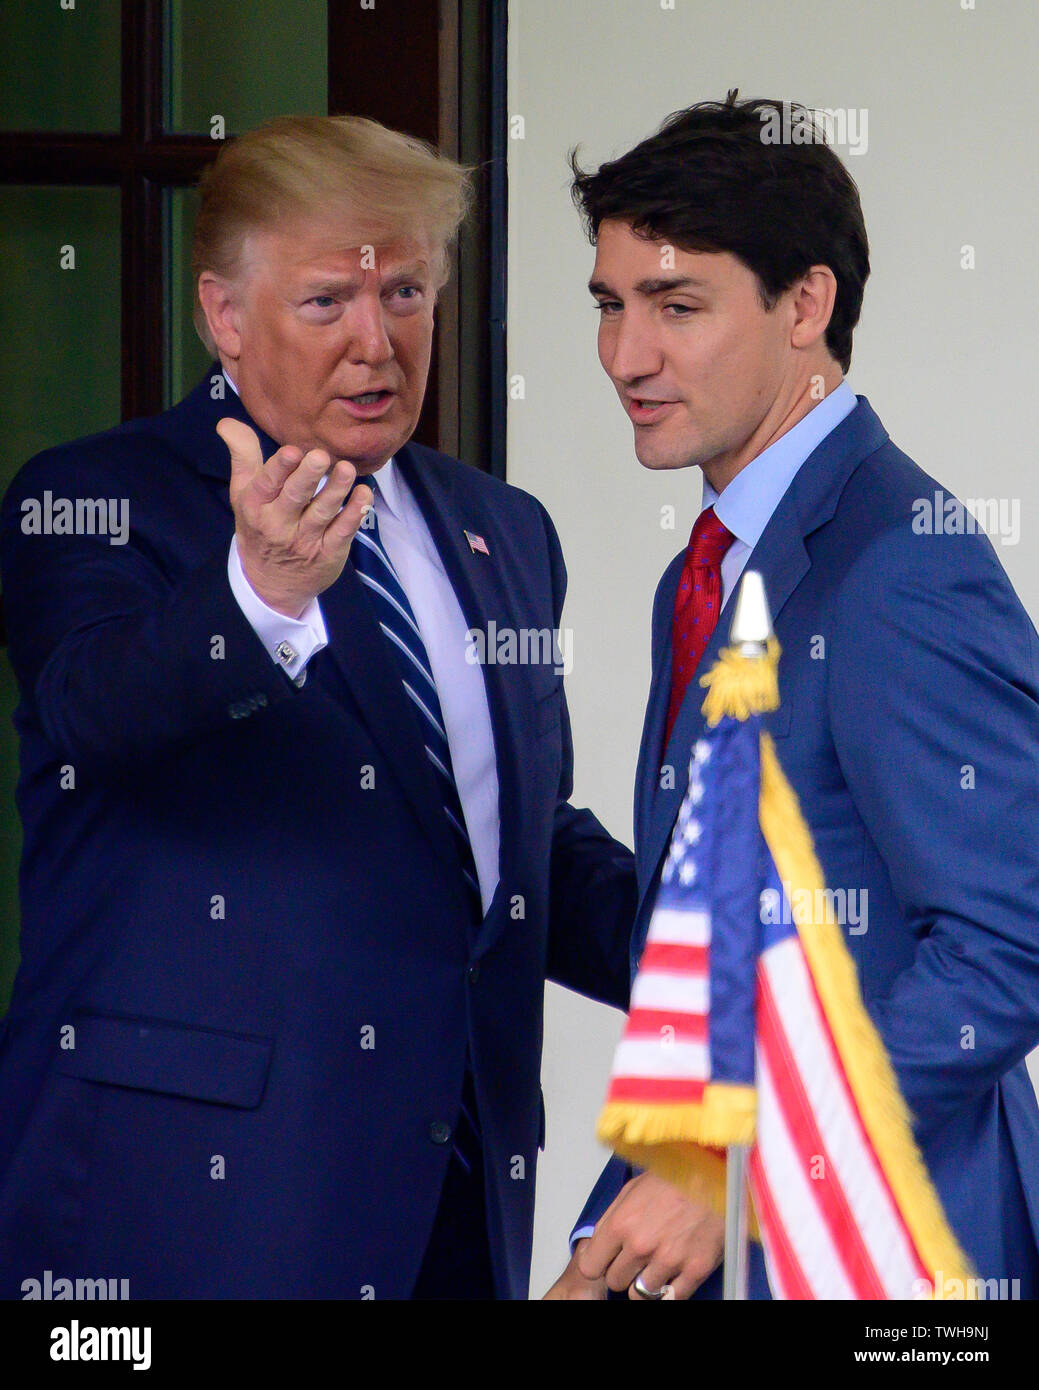 United States President Donald J. Trump participates in the arrival of Prime Minister Justin Trudeau of Canada at the Diplomatic Entrance of the White House in Washington, DC on Thursday, June 20, 2019.Credit: Ron Sachs / CNP /MediaPunch Stock Photo